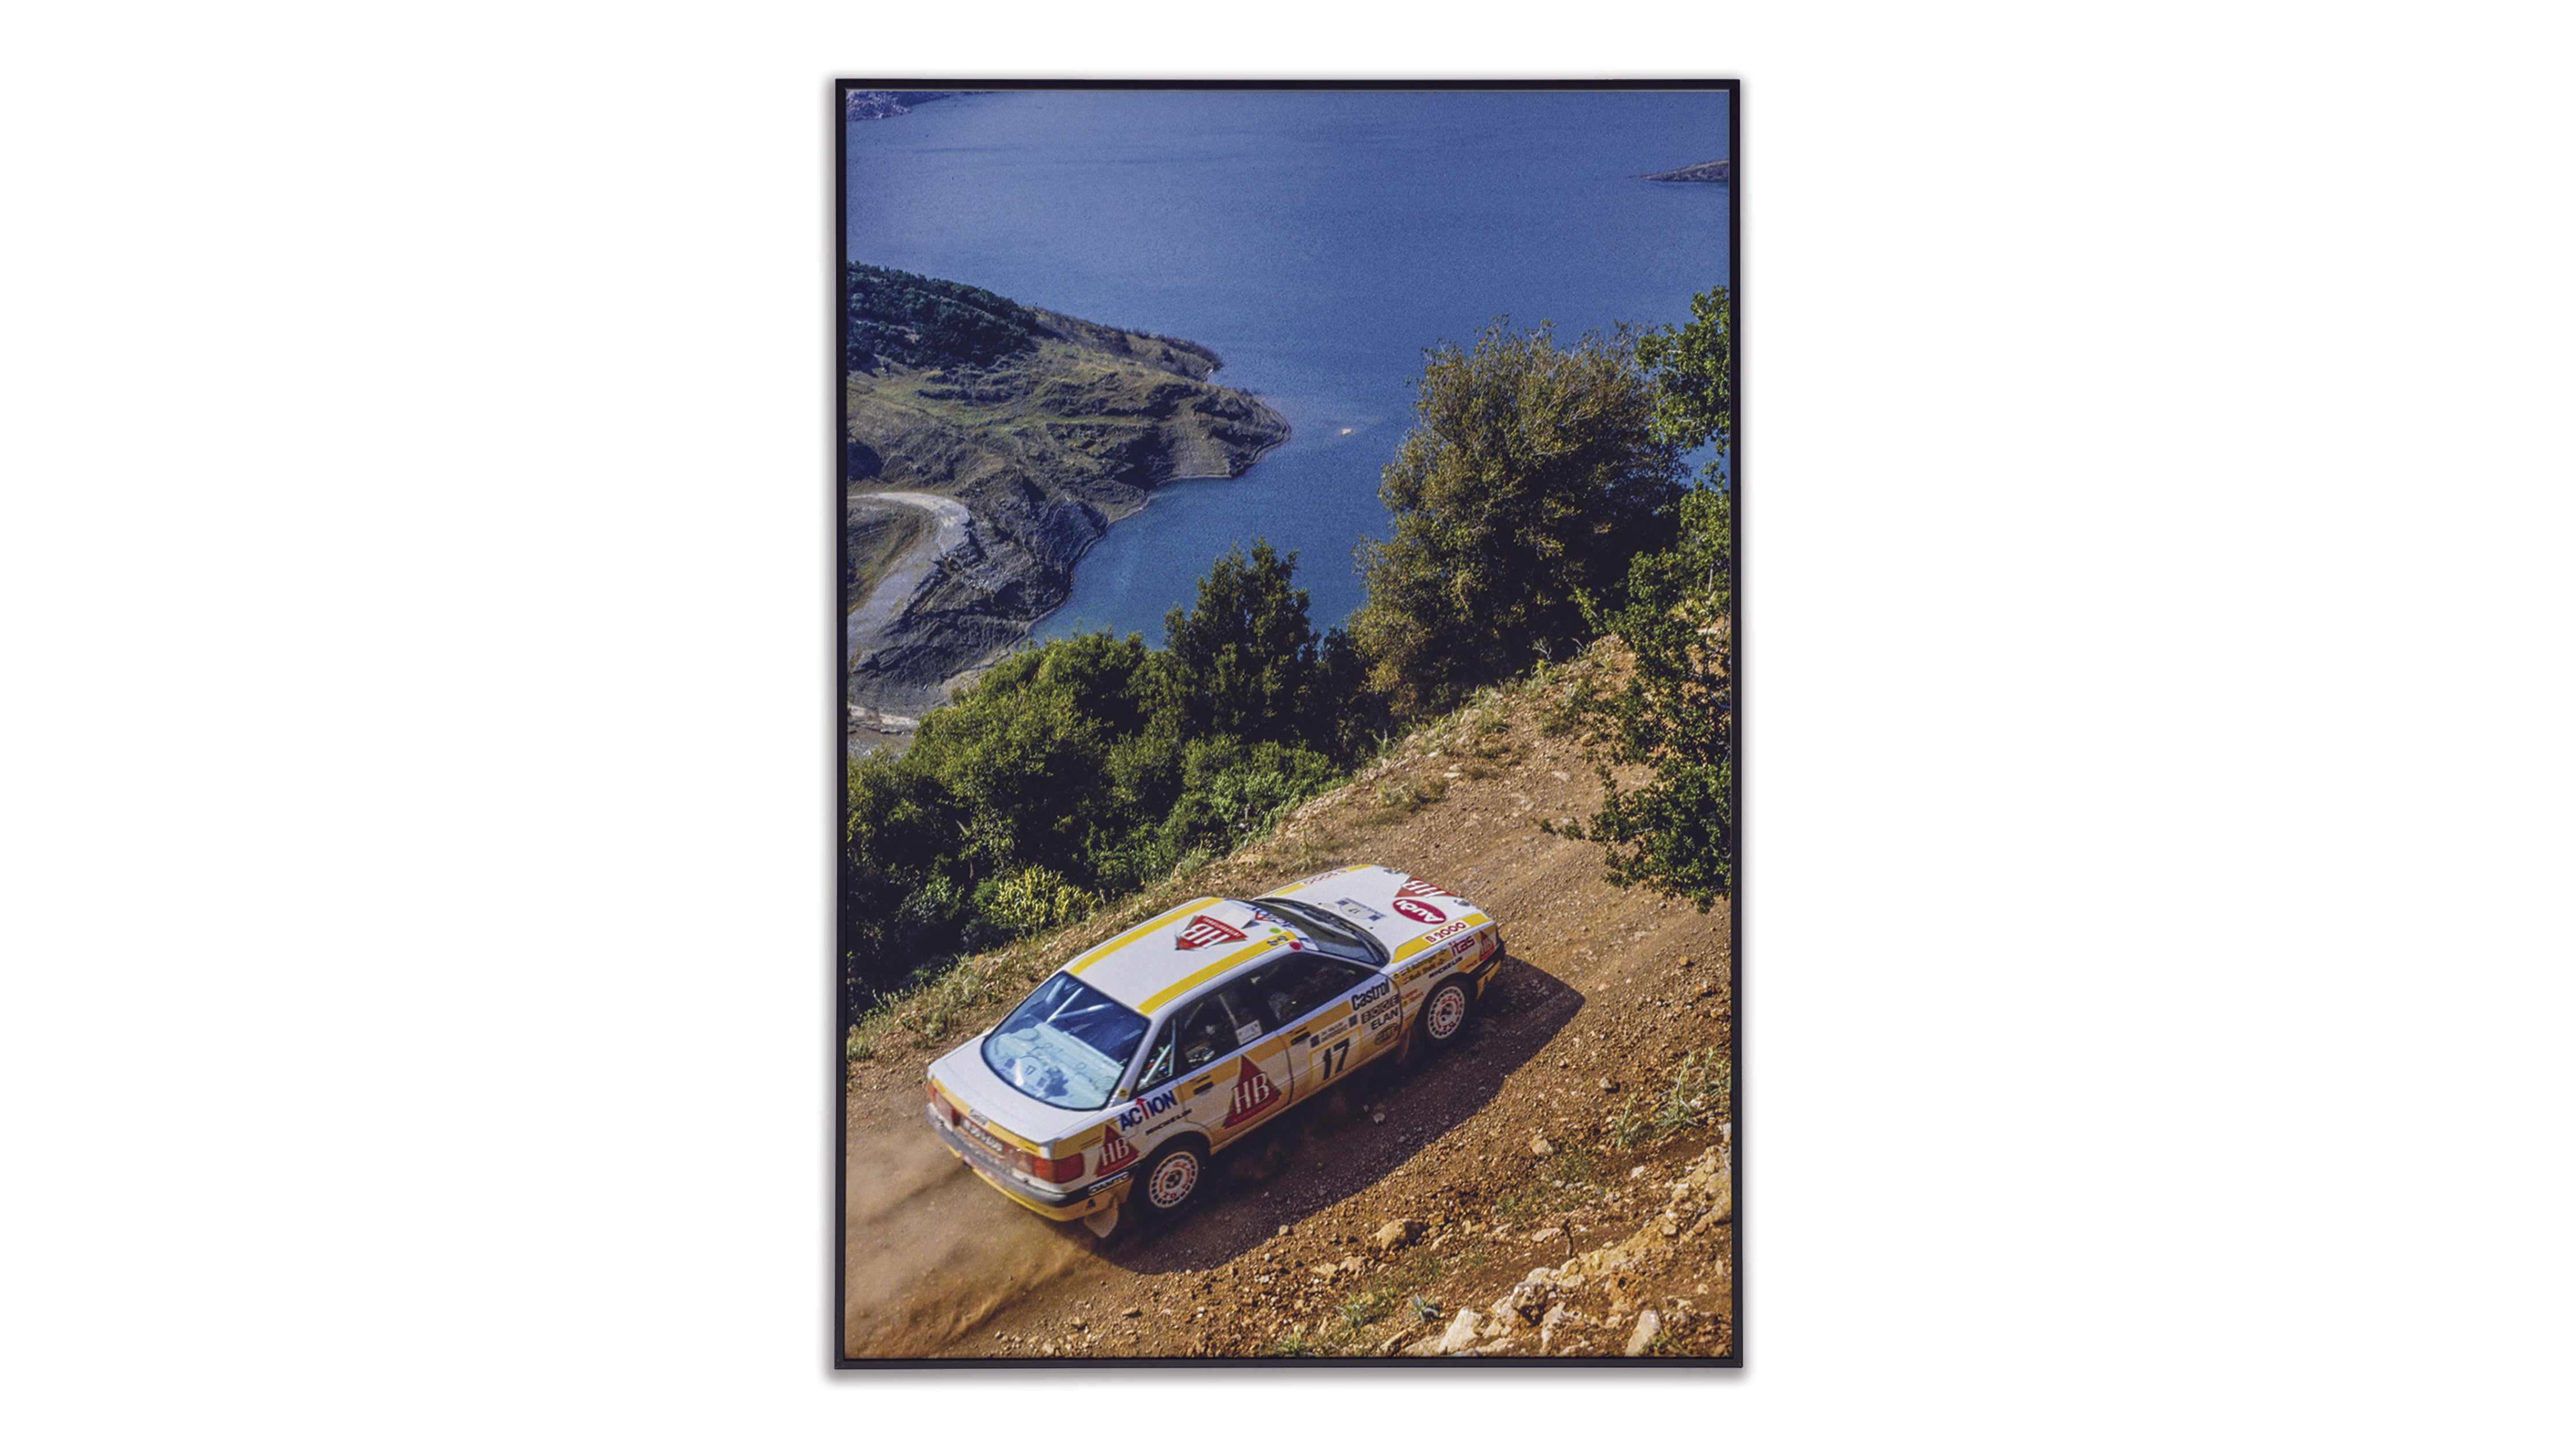 Audi 90 Quattro at WRC 1989 - Giant Poster - The Mousepad Company